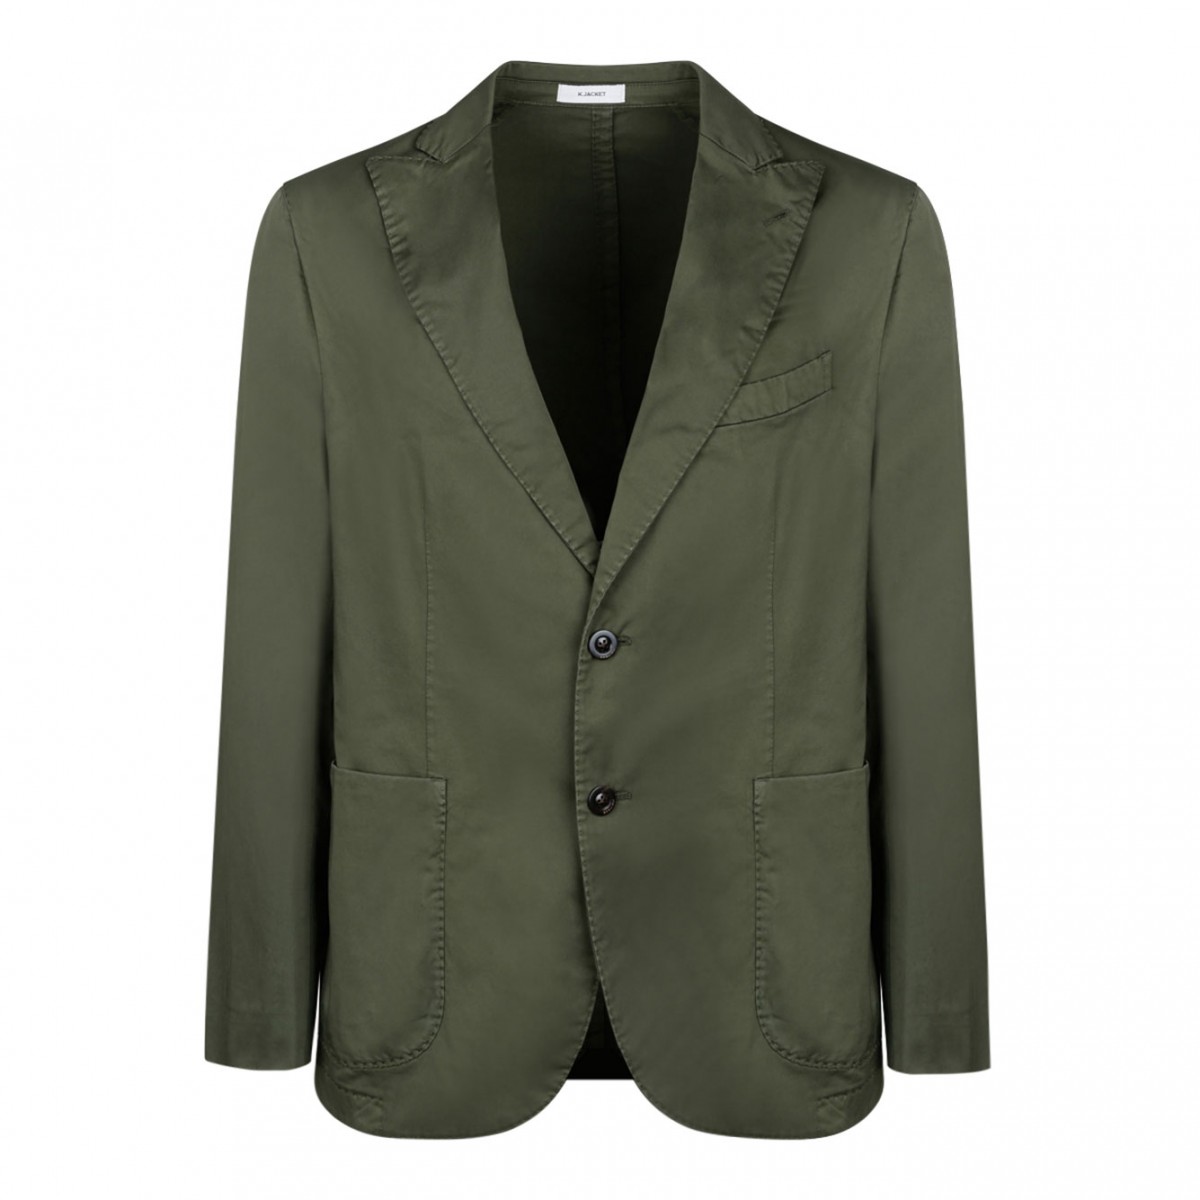 Two Pieces Olive Green Suit